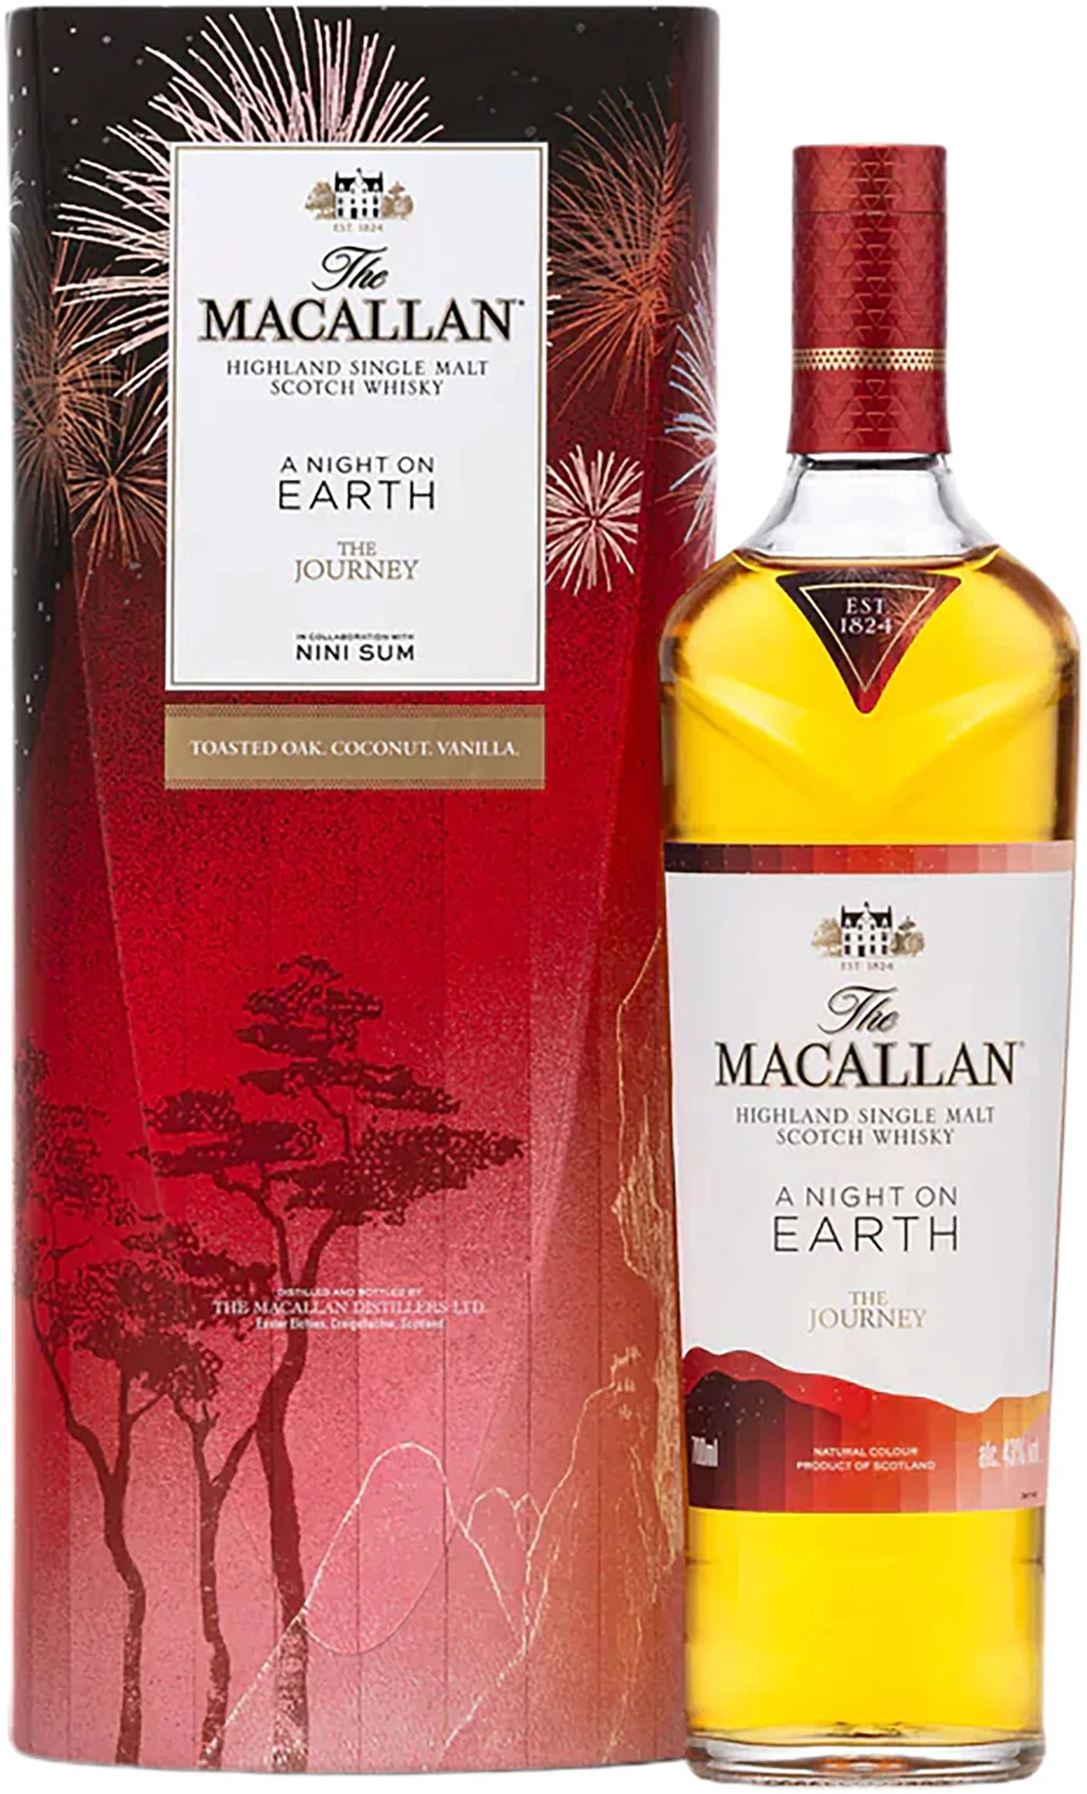 The Macallan A Night on Earth Release #3 The Journey Single Malt Whisky 700ml